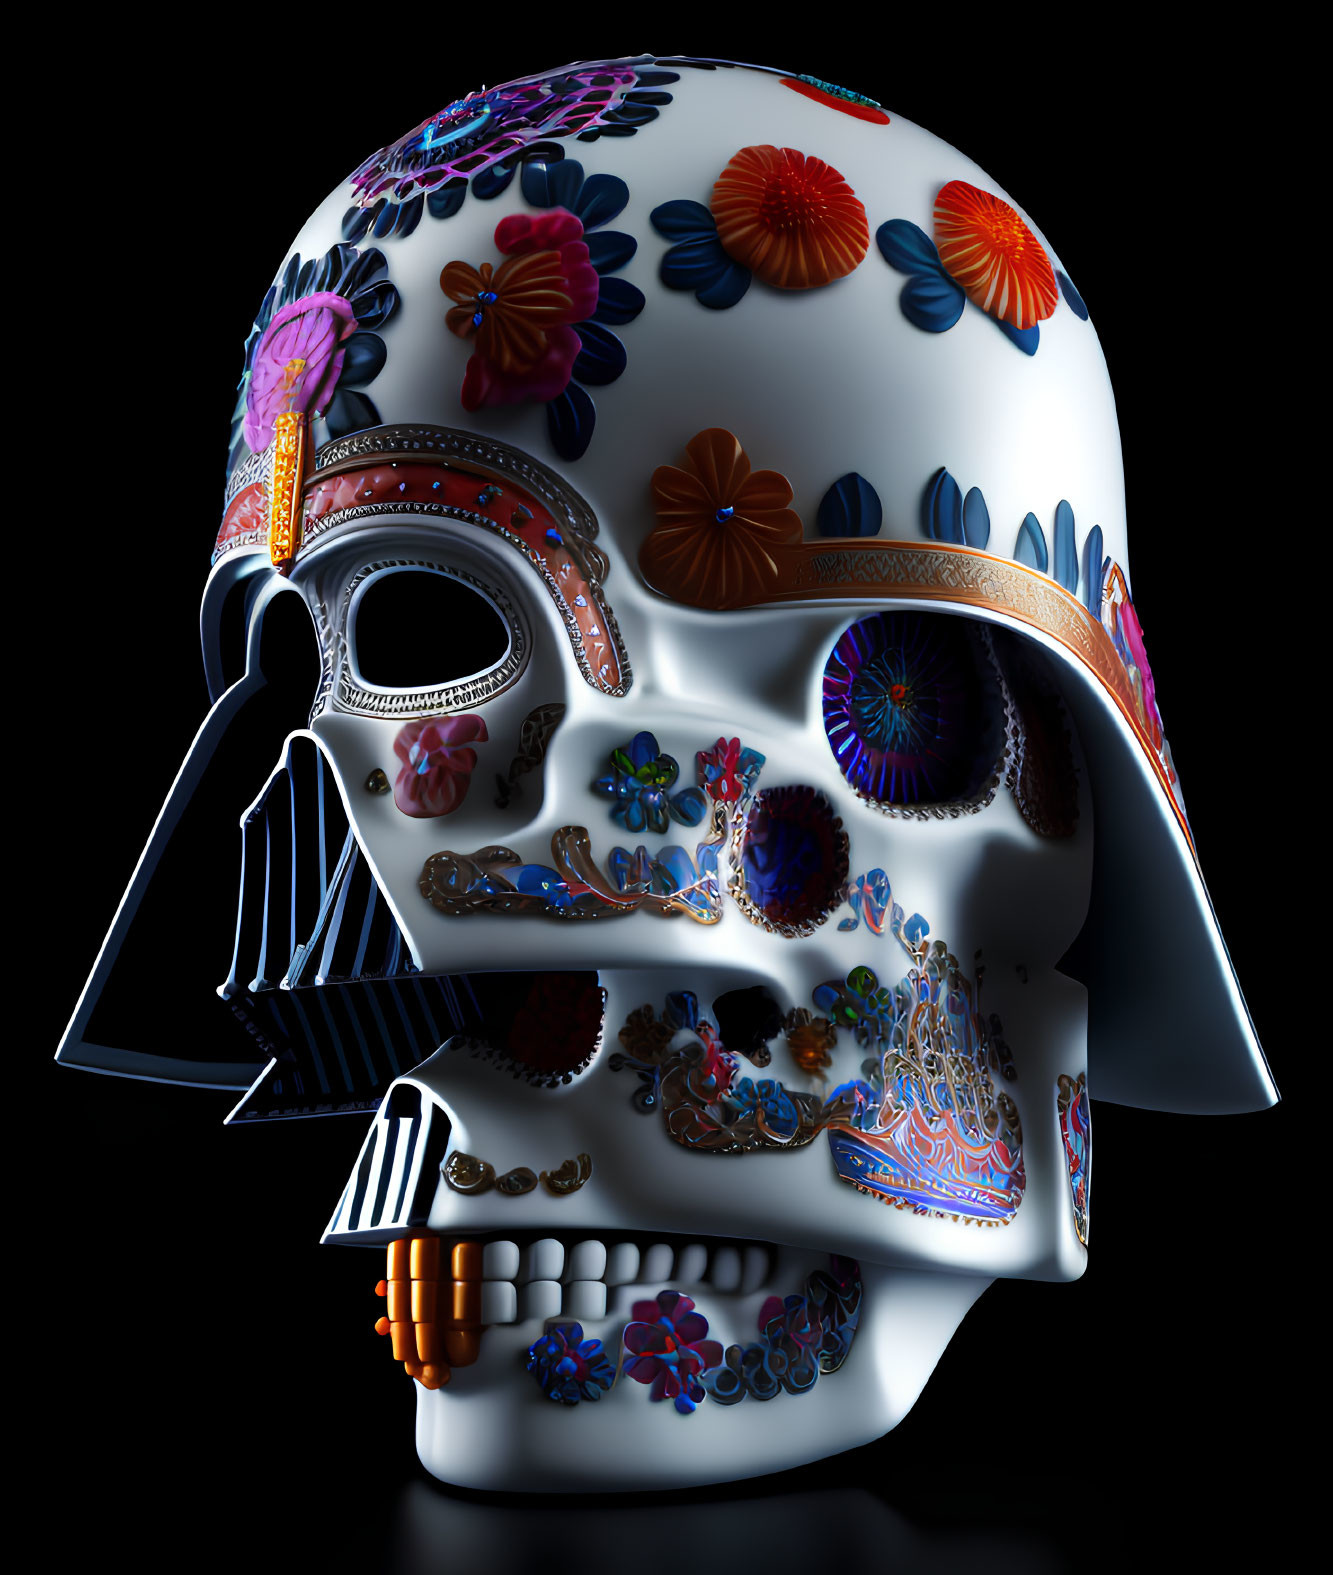 Colorful Floral Patterned Skull with Stylized Helmet on Dark Background